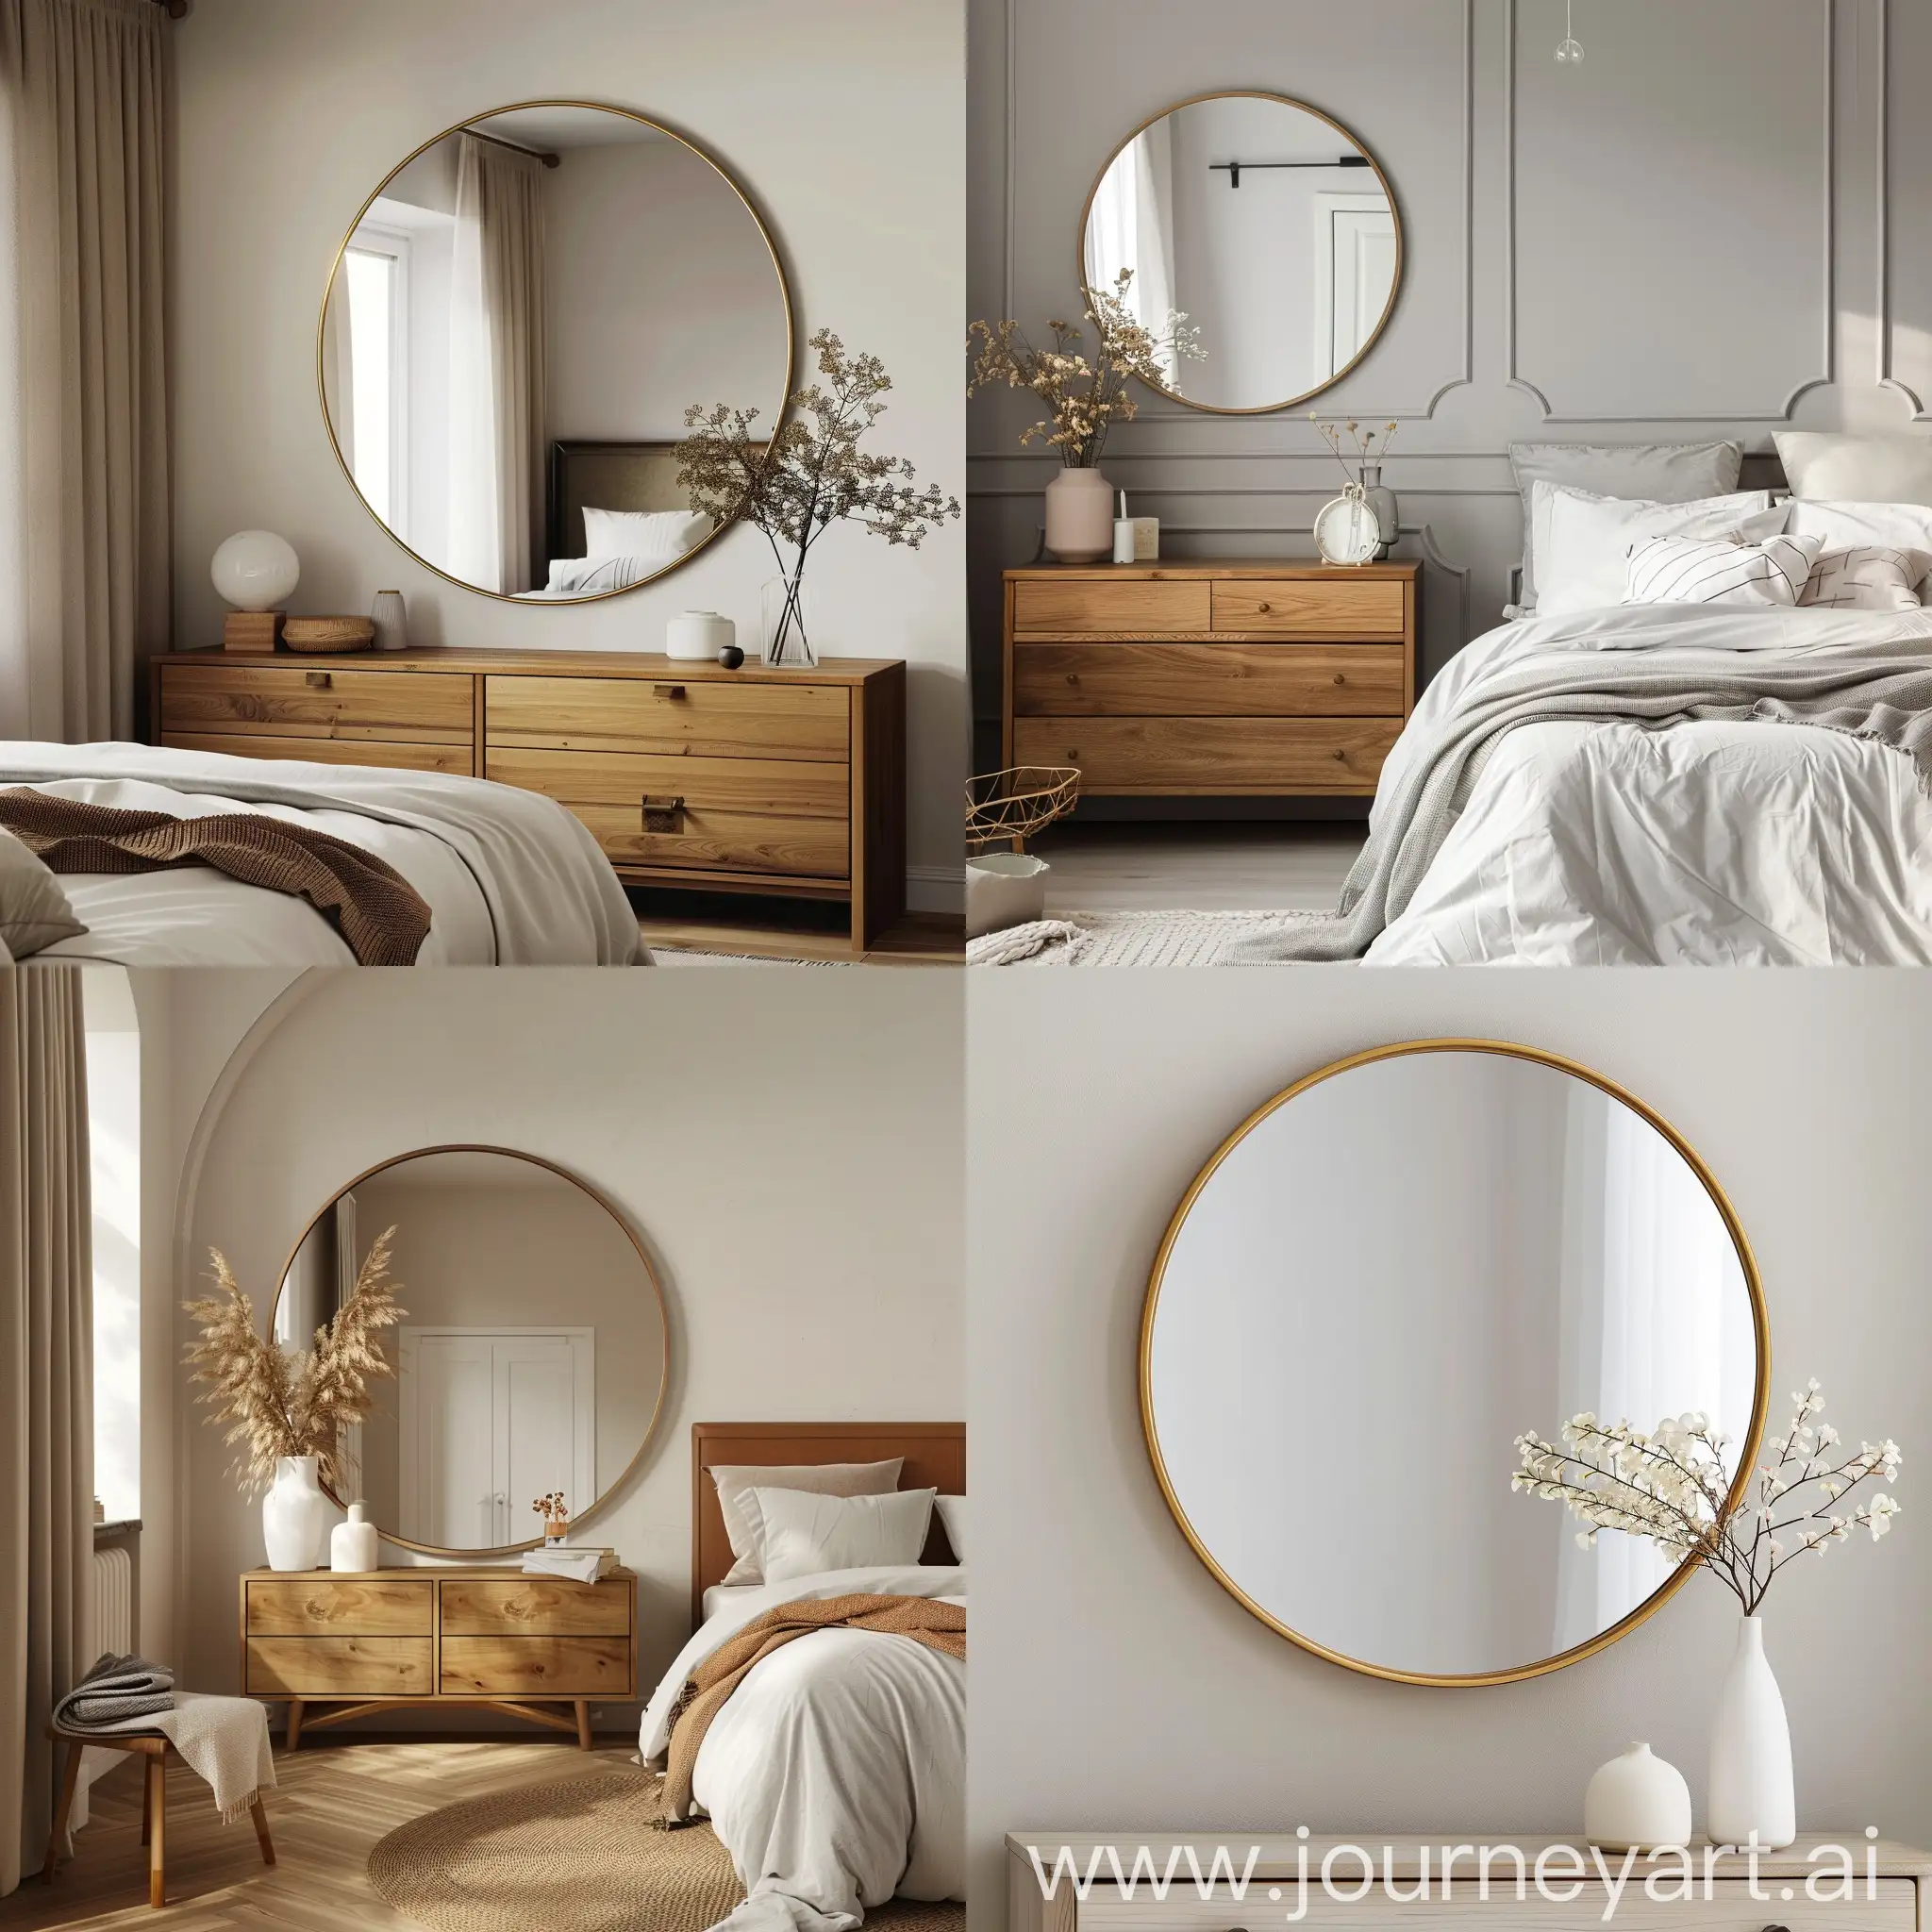 Transform your bedroom into a spacious sanctuary with a stylish decorative mirror. Whether it's a sleek modern design, a vintage-inspired frame, or a minimalist round mirror, choosing the right mirror can not only make your room feel larger but also add a touch of elegance and depth to your space. Imagine how a well-placed mirror can brighten your room, reflect natural light, and create a cozy ambiance. Let your mirror choice reflect your unique style and enhance the overall aesthetic of your bedroom retreat. Whether hung above a dresser, leaned against a wall, or as a centerpiece above your bed, your decorative mirror will be more than just a reflection—it'll be a statement piece that transforms your bedroom into a stylish haven.



